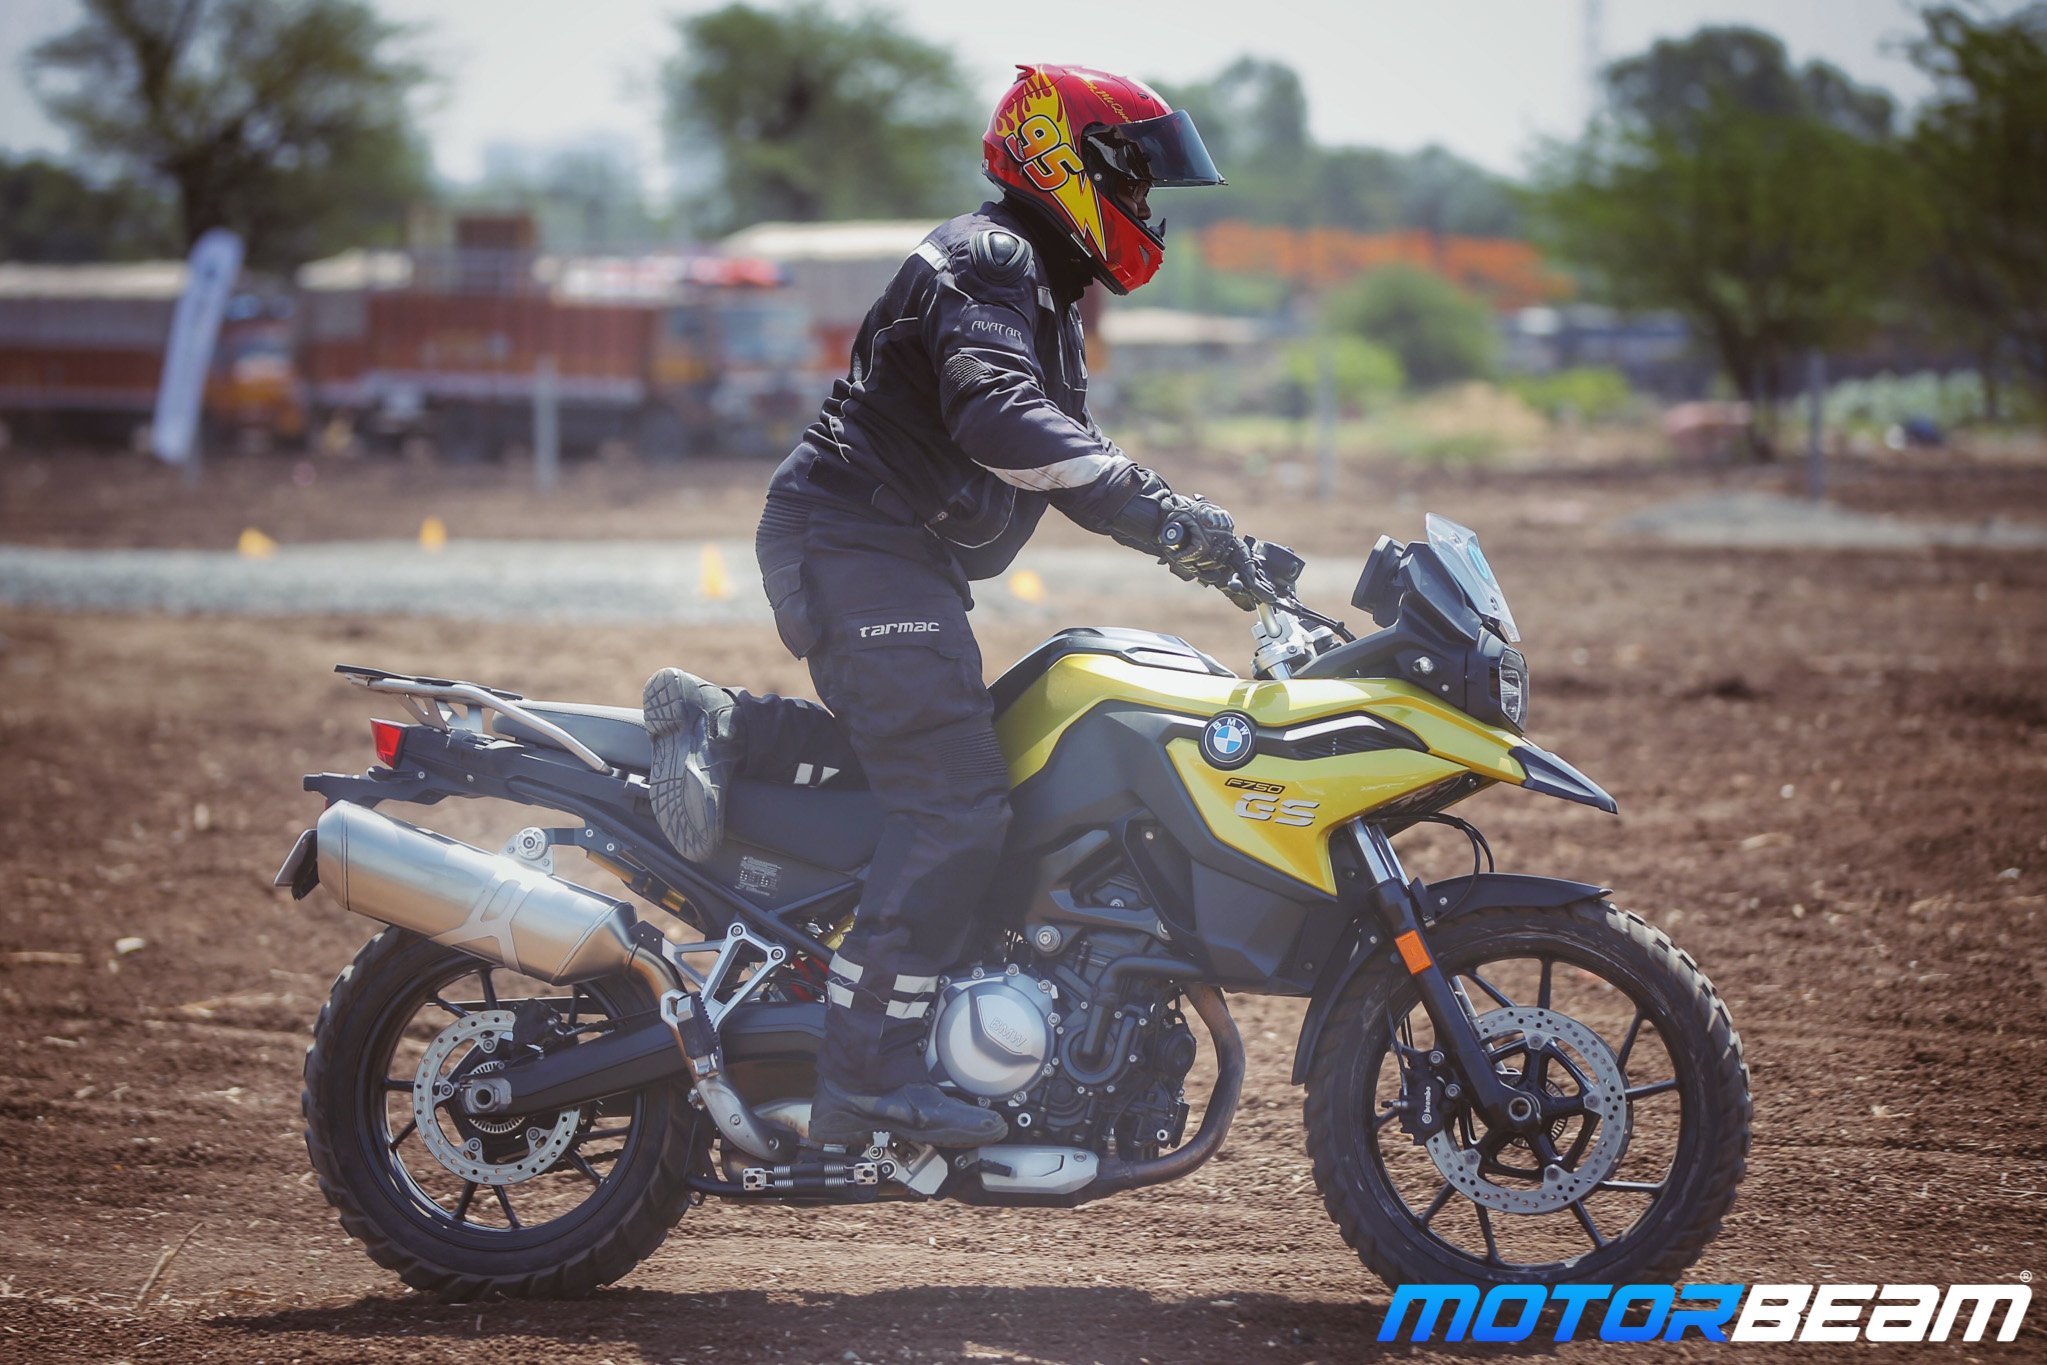 BMW GS Experience Off-Road Training